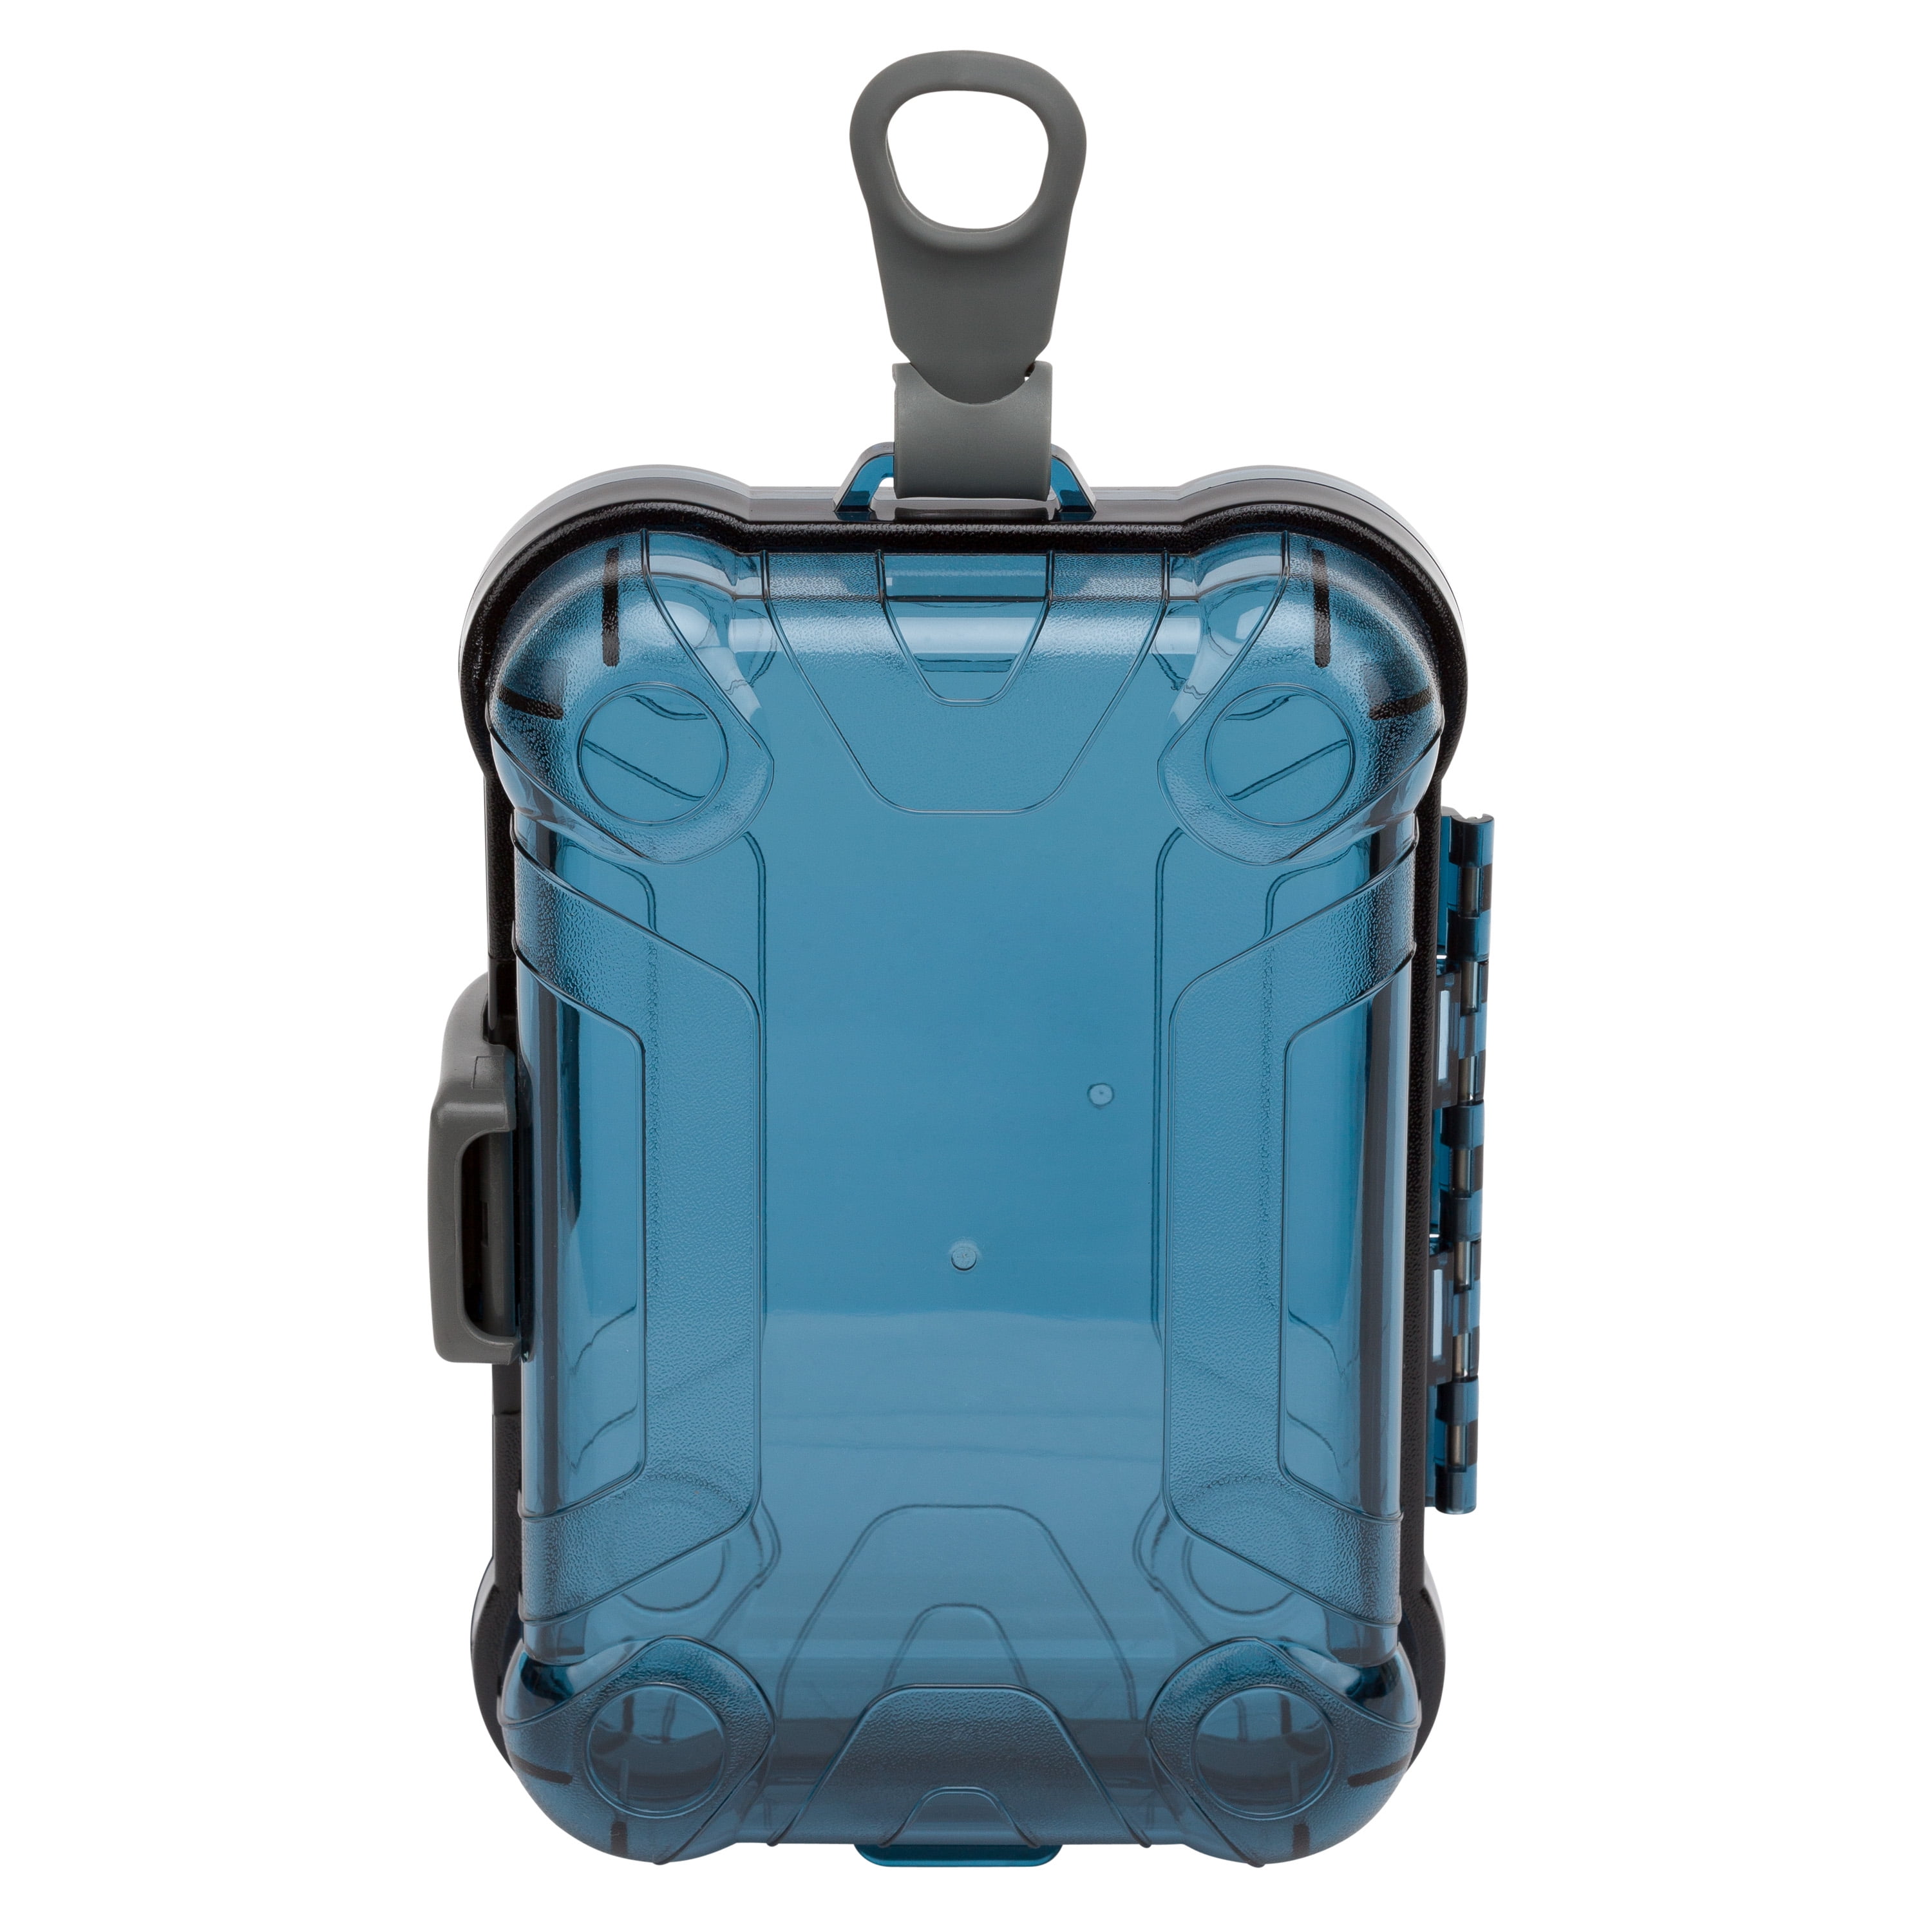 Outdoor Products Small Watertight Dry Box, Blue Polycarbonate